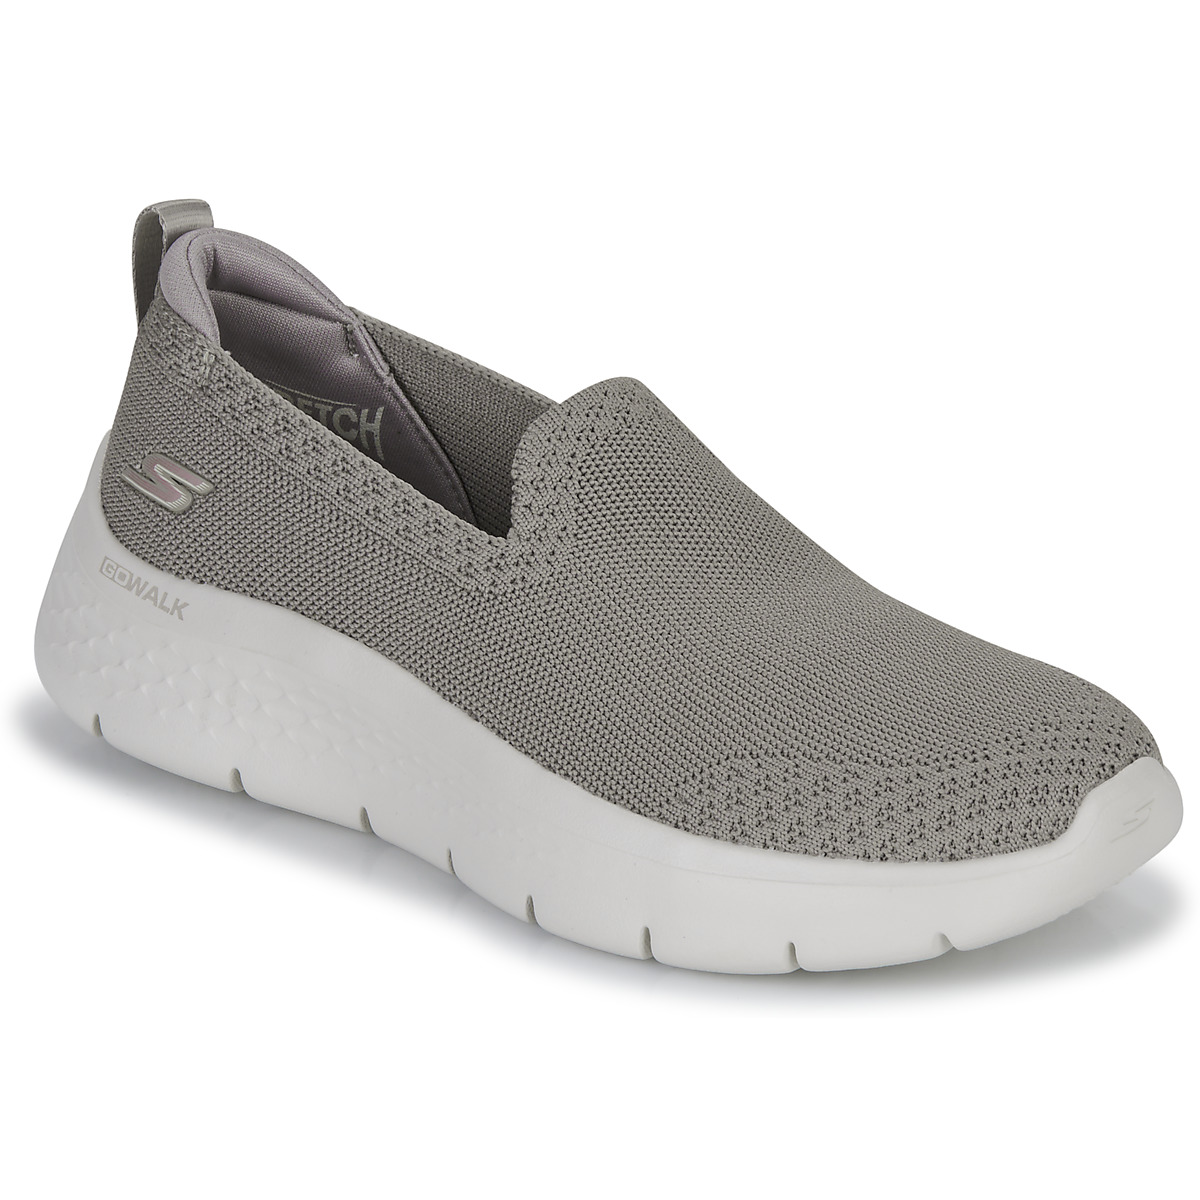 Skechers Grey - Free delivery | Spartoo NET ! - Shoes Slip ons Women USD/$75.00